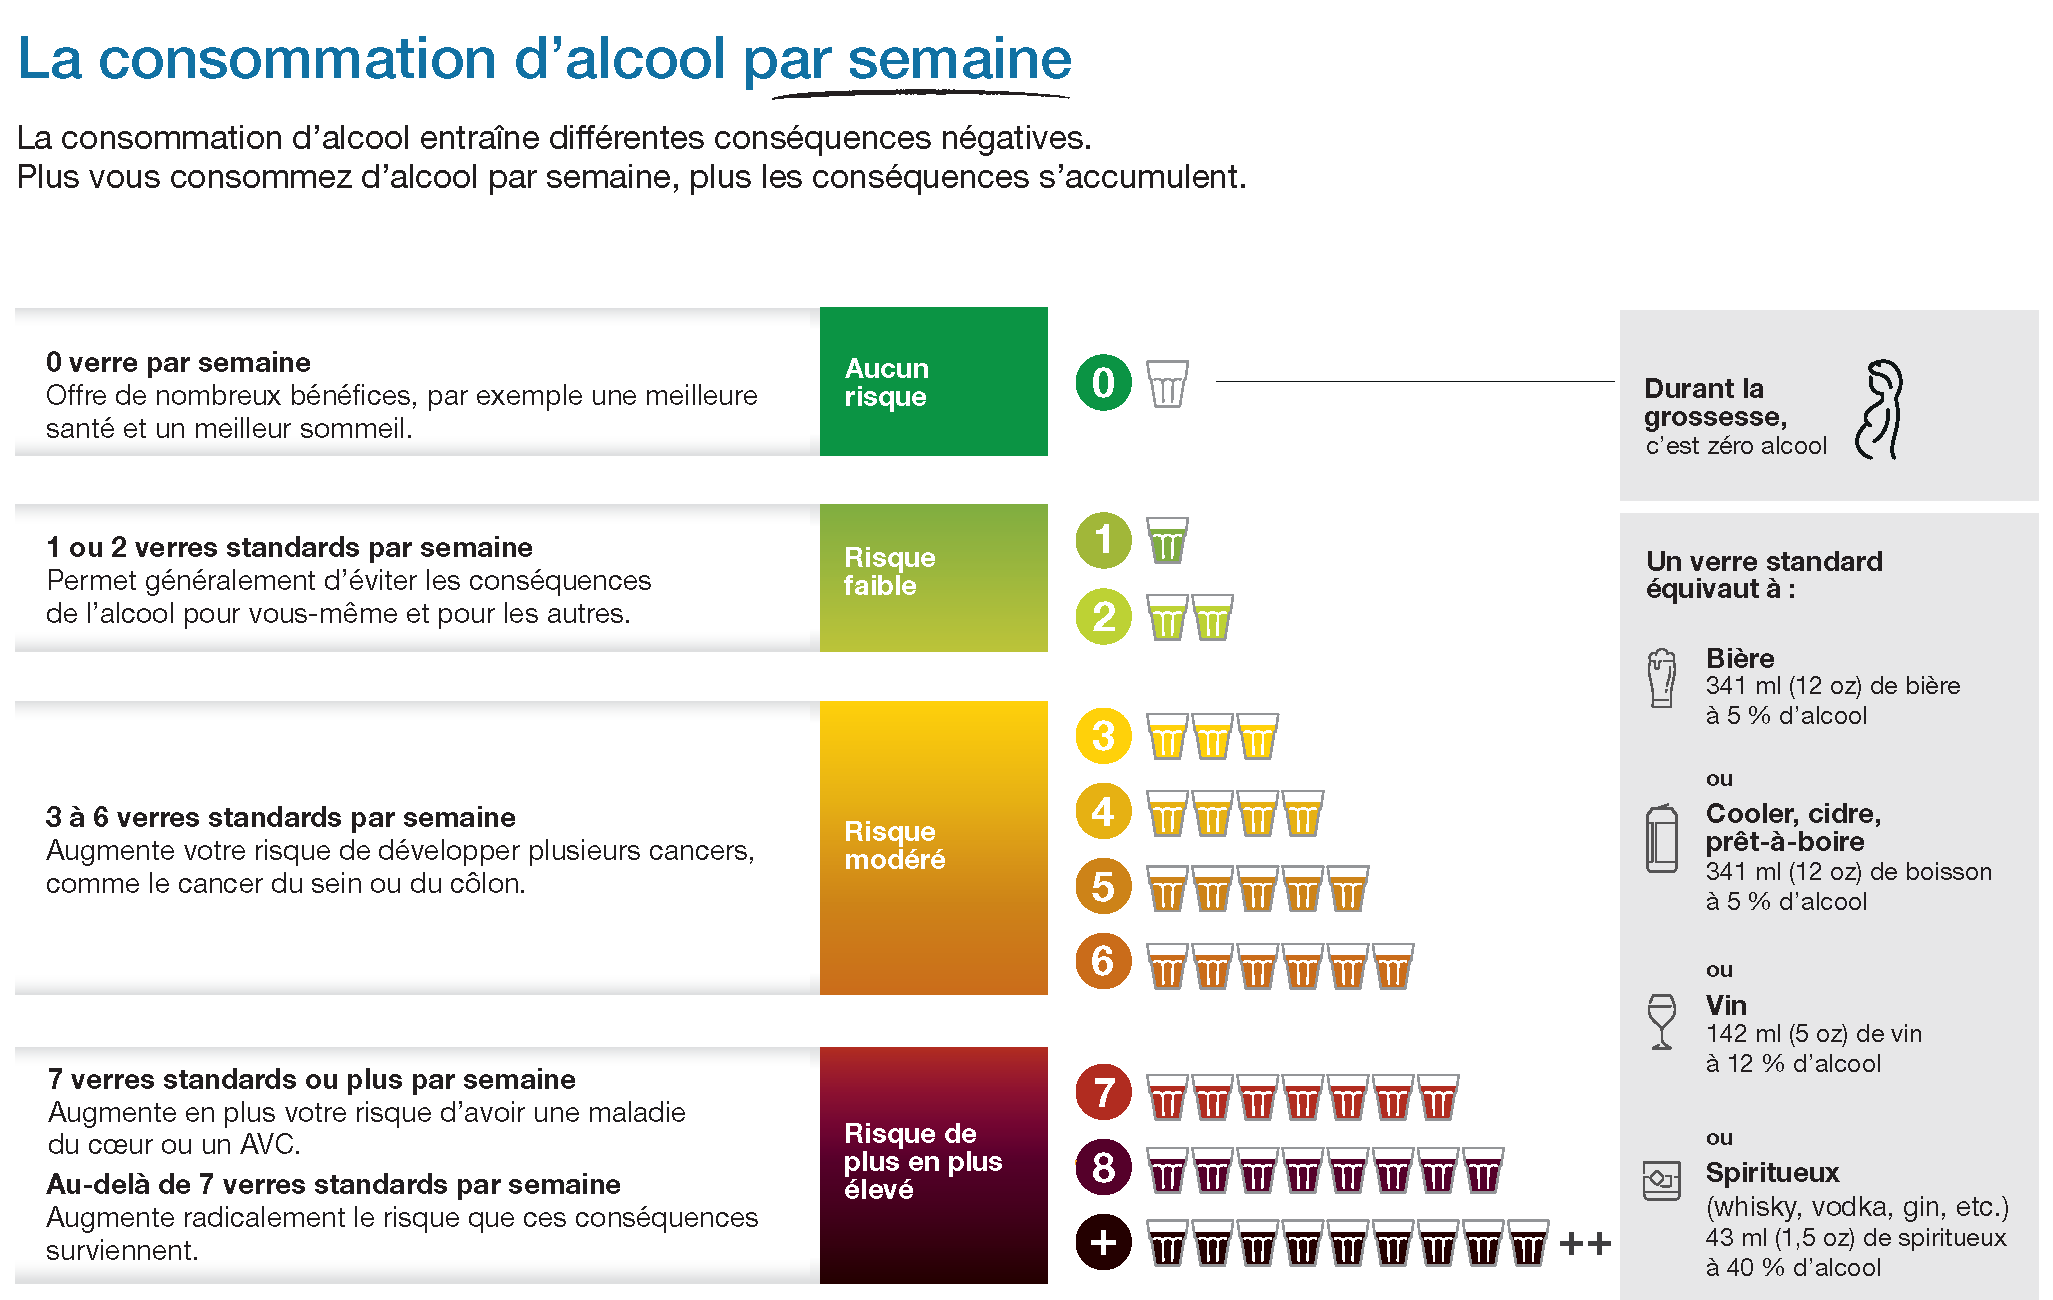 Chart of negative consequences of alcohol consumption based on weekly consumption